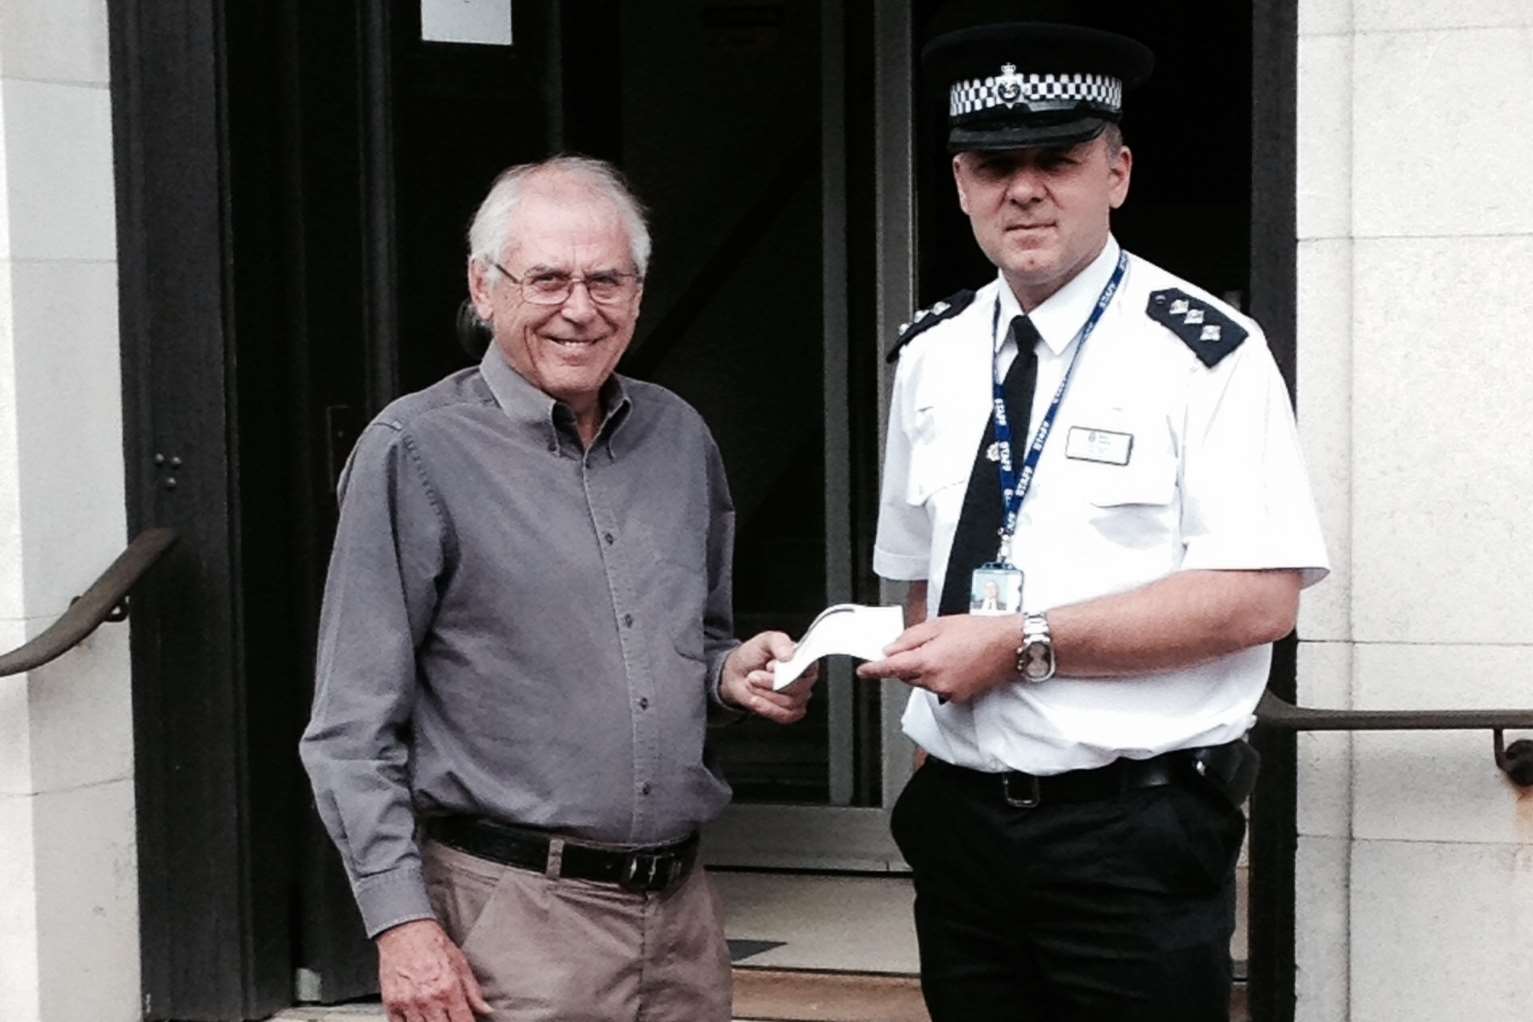 Chief Inspector Dave Pate, presenting a cheque to Mental Health Resource chairman Len Horwood